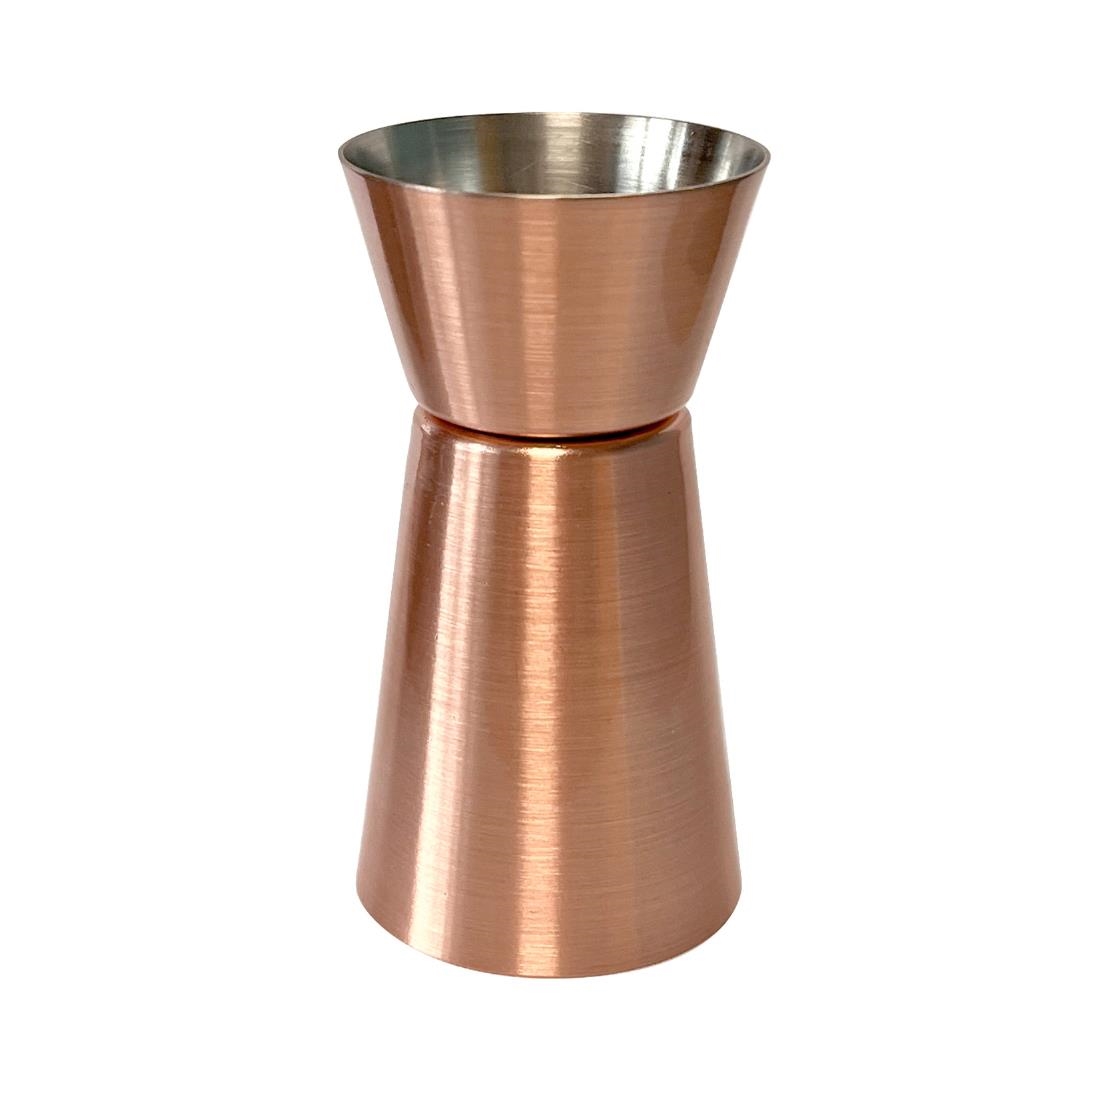 Beaumont Professional Stainless Steel Jigger Copper Plated 25-50ml (CZ351)